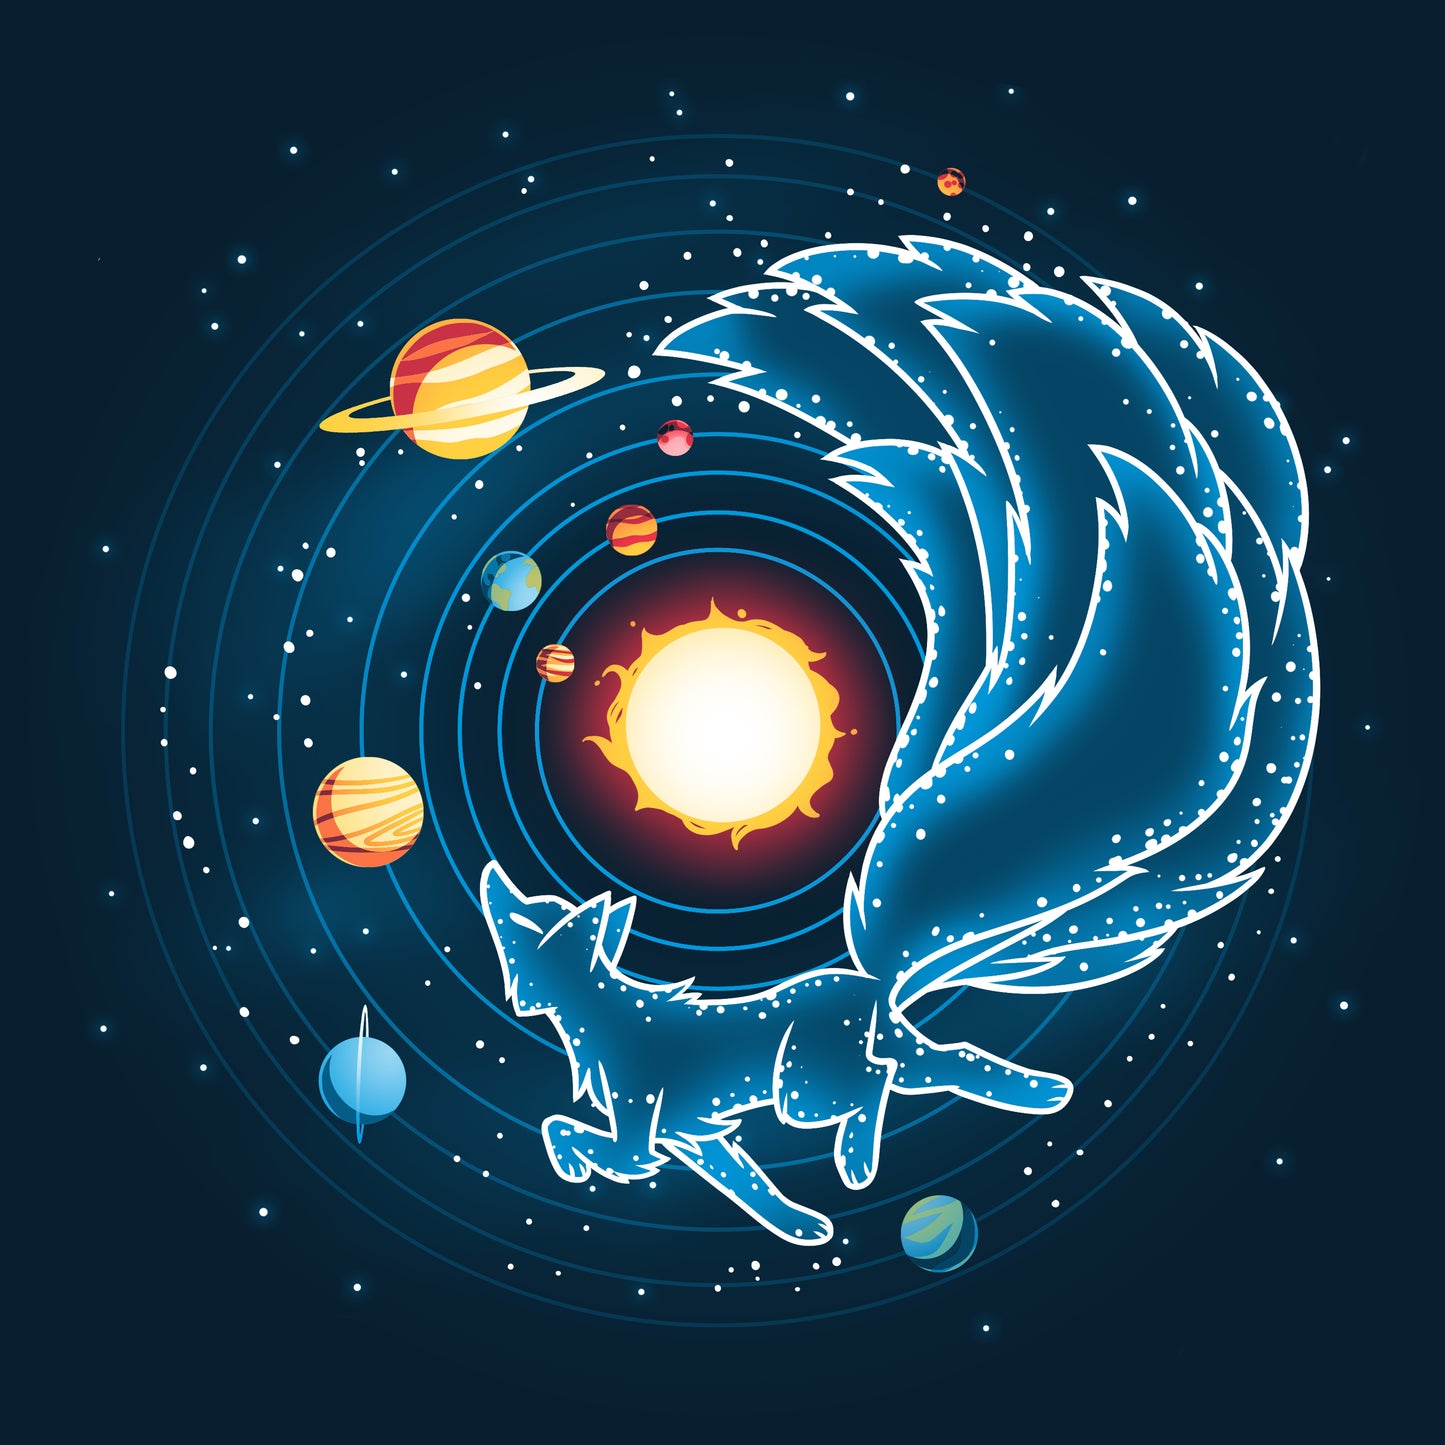 An image of a fox prancing across the Kitsune Constellation among the planets, brought to you by TeeTurtle.